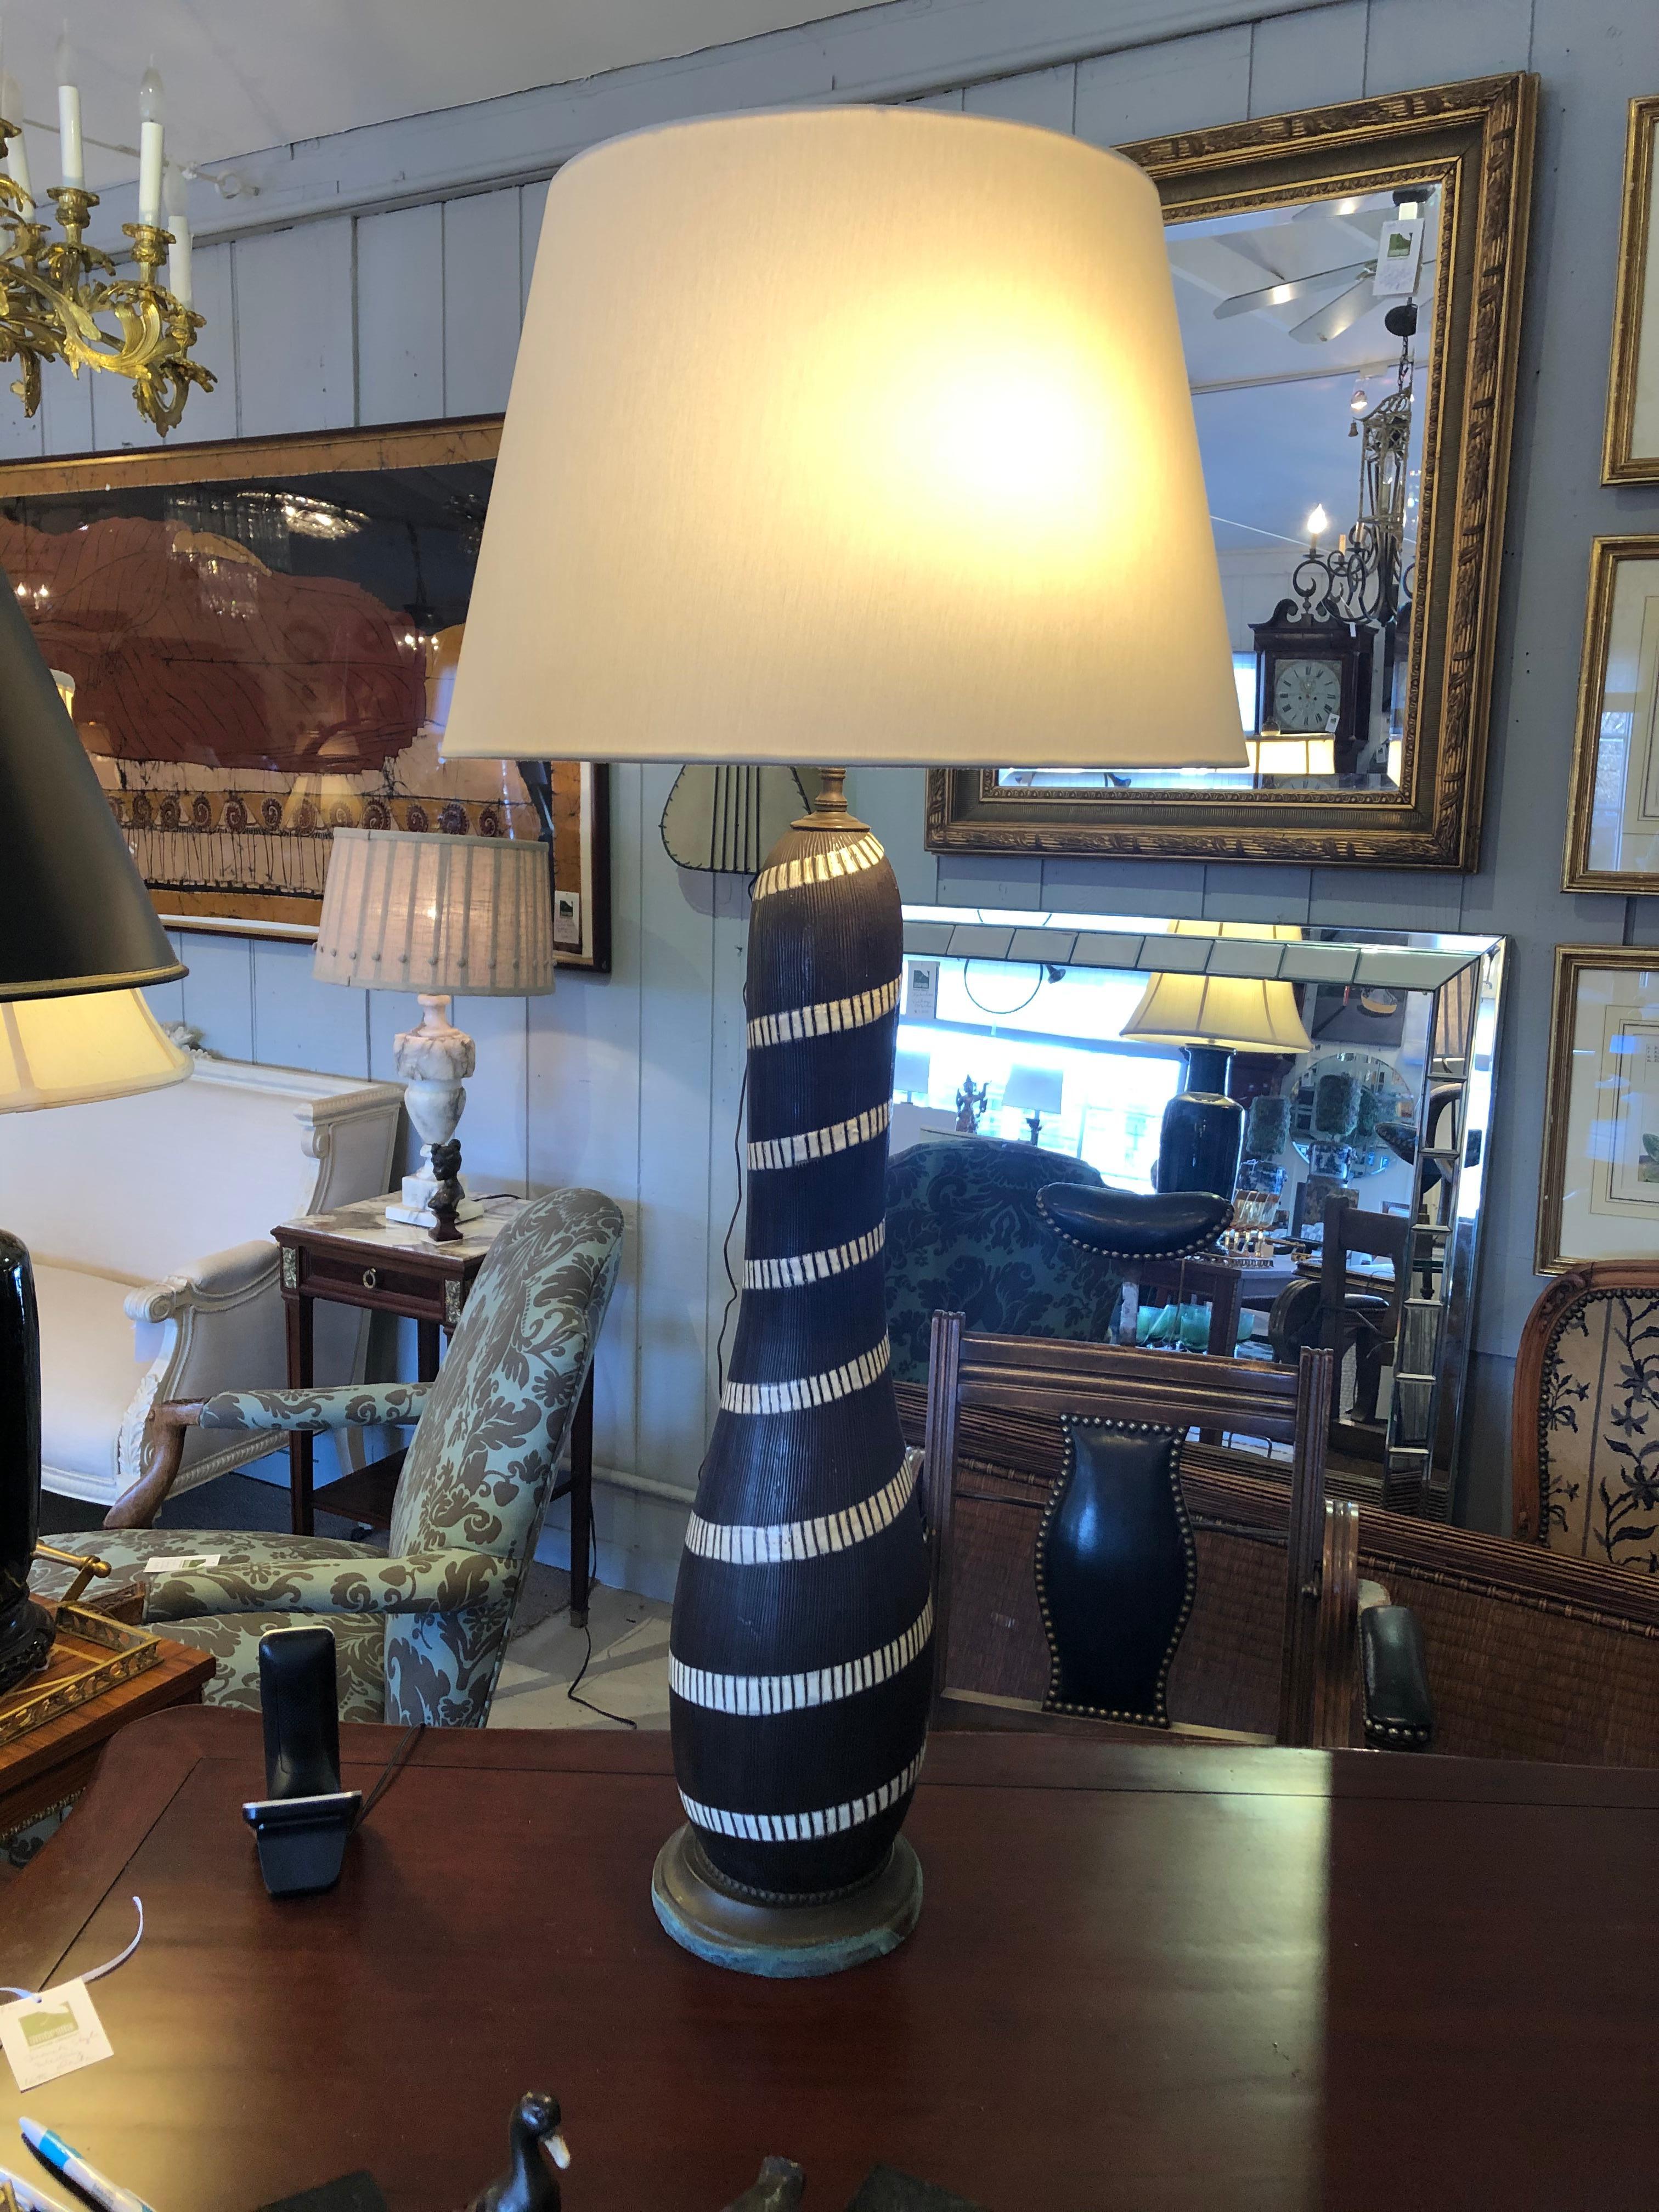 One of a kind artisan made pottery table lamp with super stylish Mid-Century Modern design having a tall elongated brown and white base with cool spiral design and hand carved lines. There's a brass base with patina and double socket. Shade not